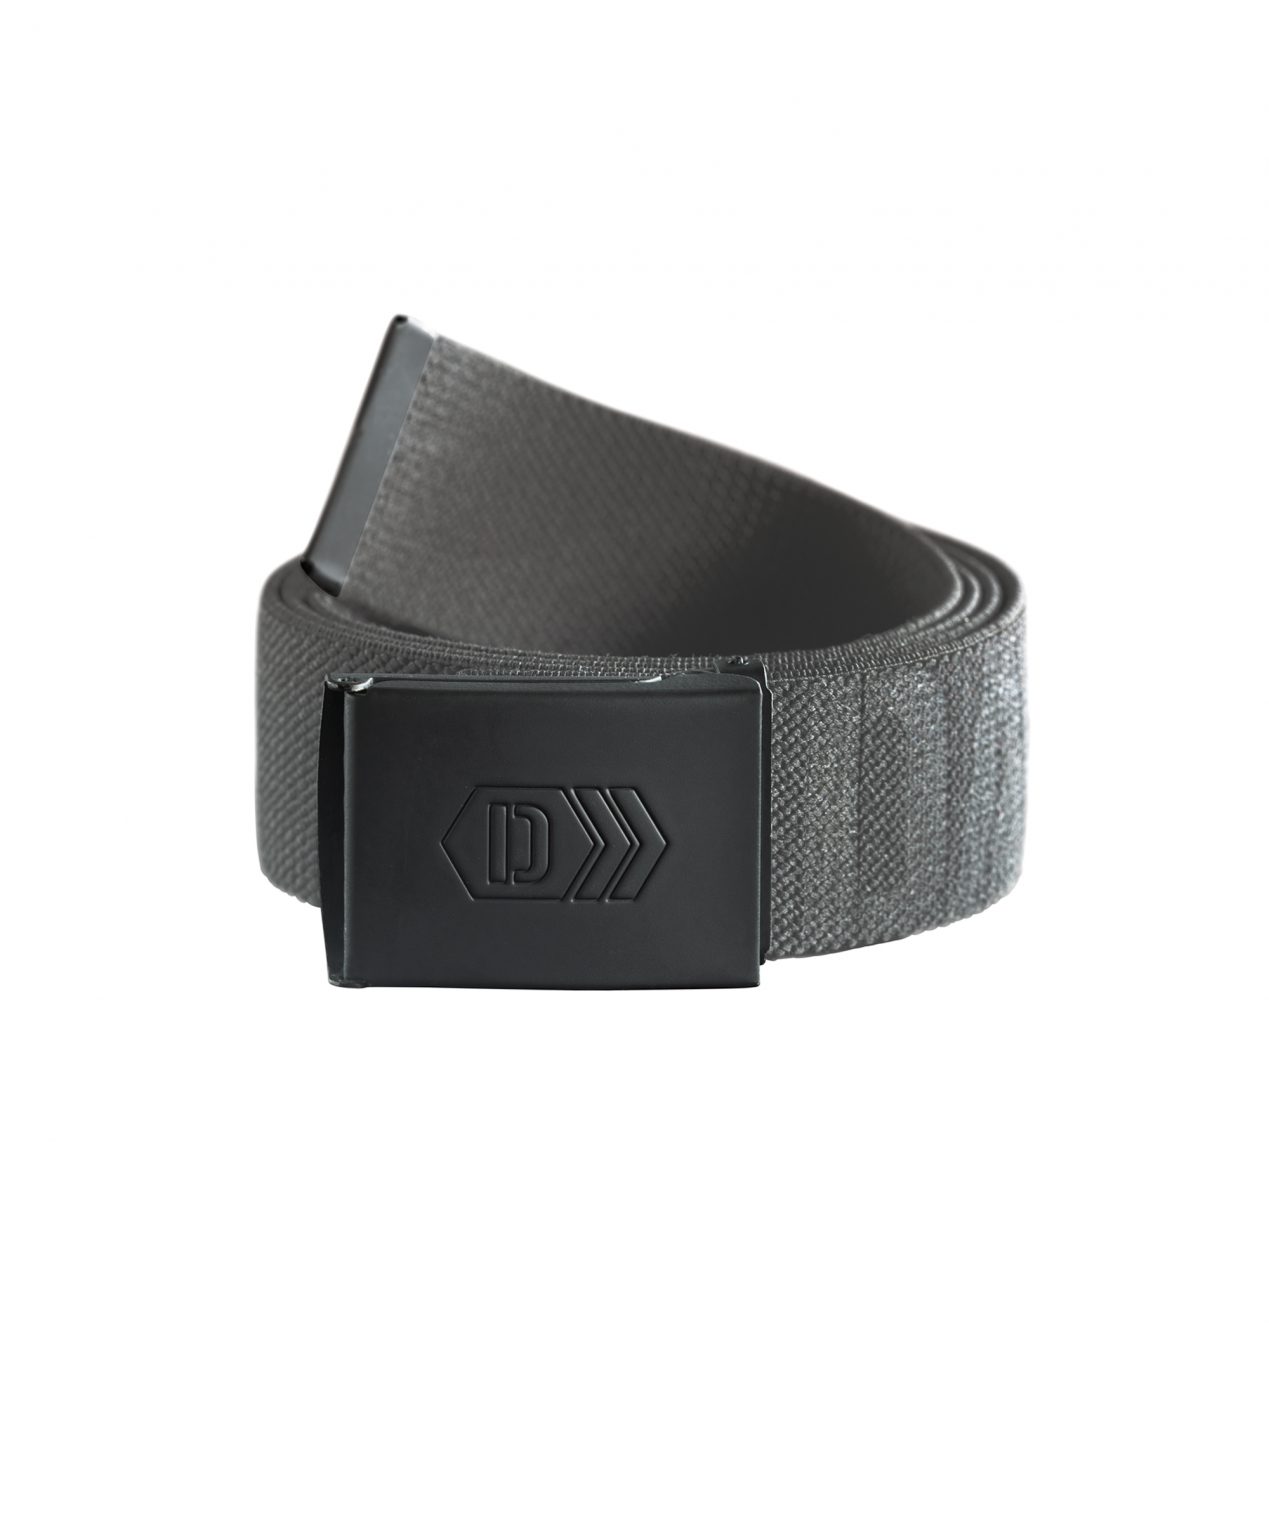 xantus stretch belt with print anthracite grey front